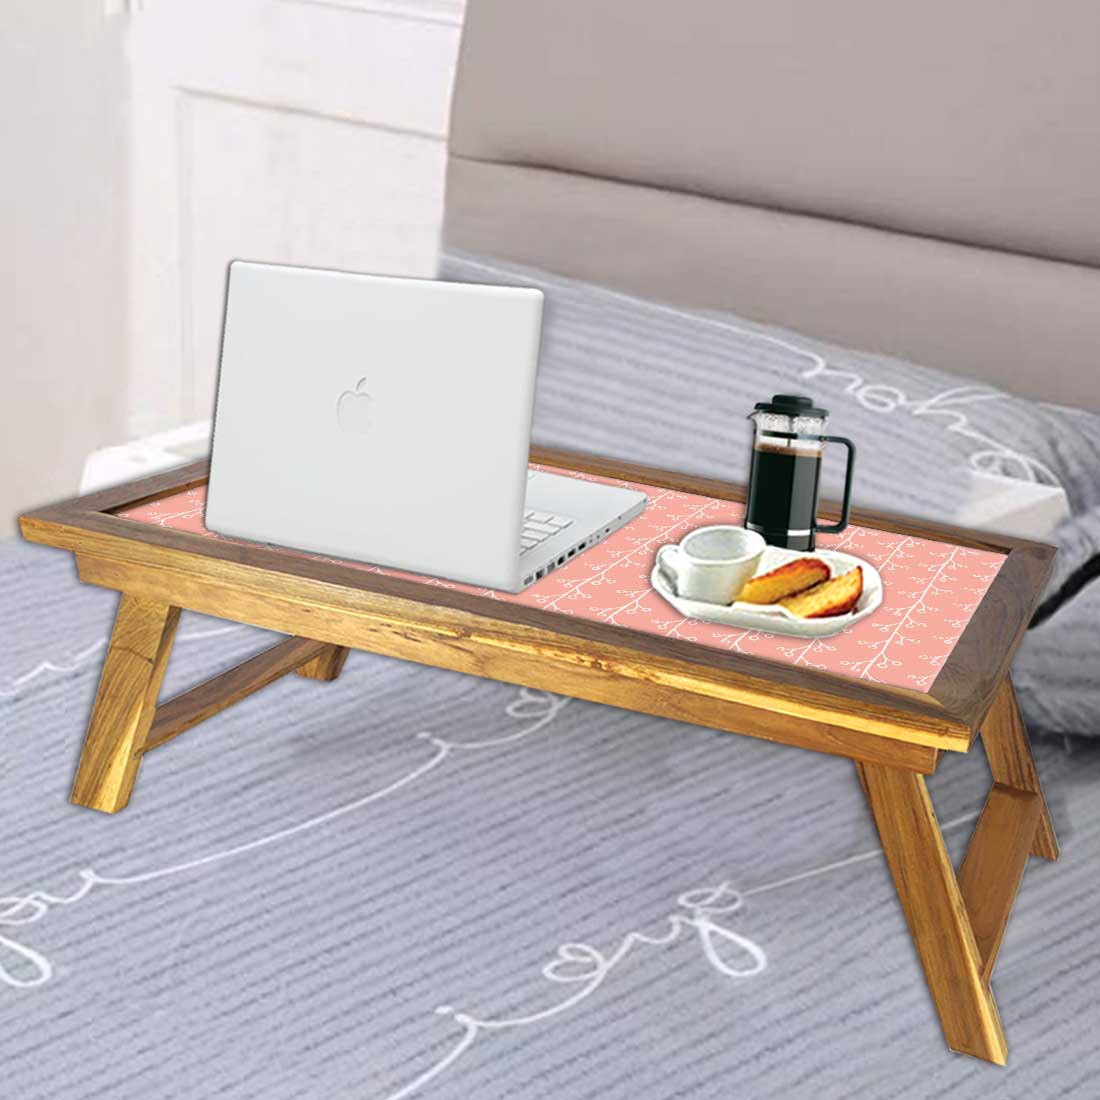 Nutcase Folding Laptop Table For Home Bed Lapdesk Breakfast Table Foldable Teak Wooden Study Desk - Soft Pink Branches Nutcase